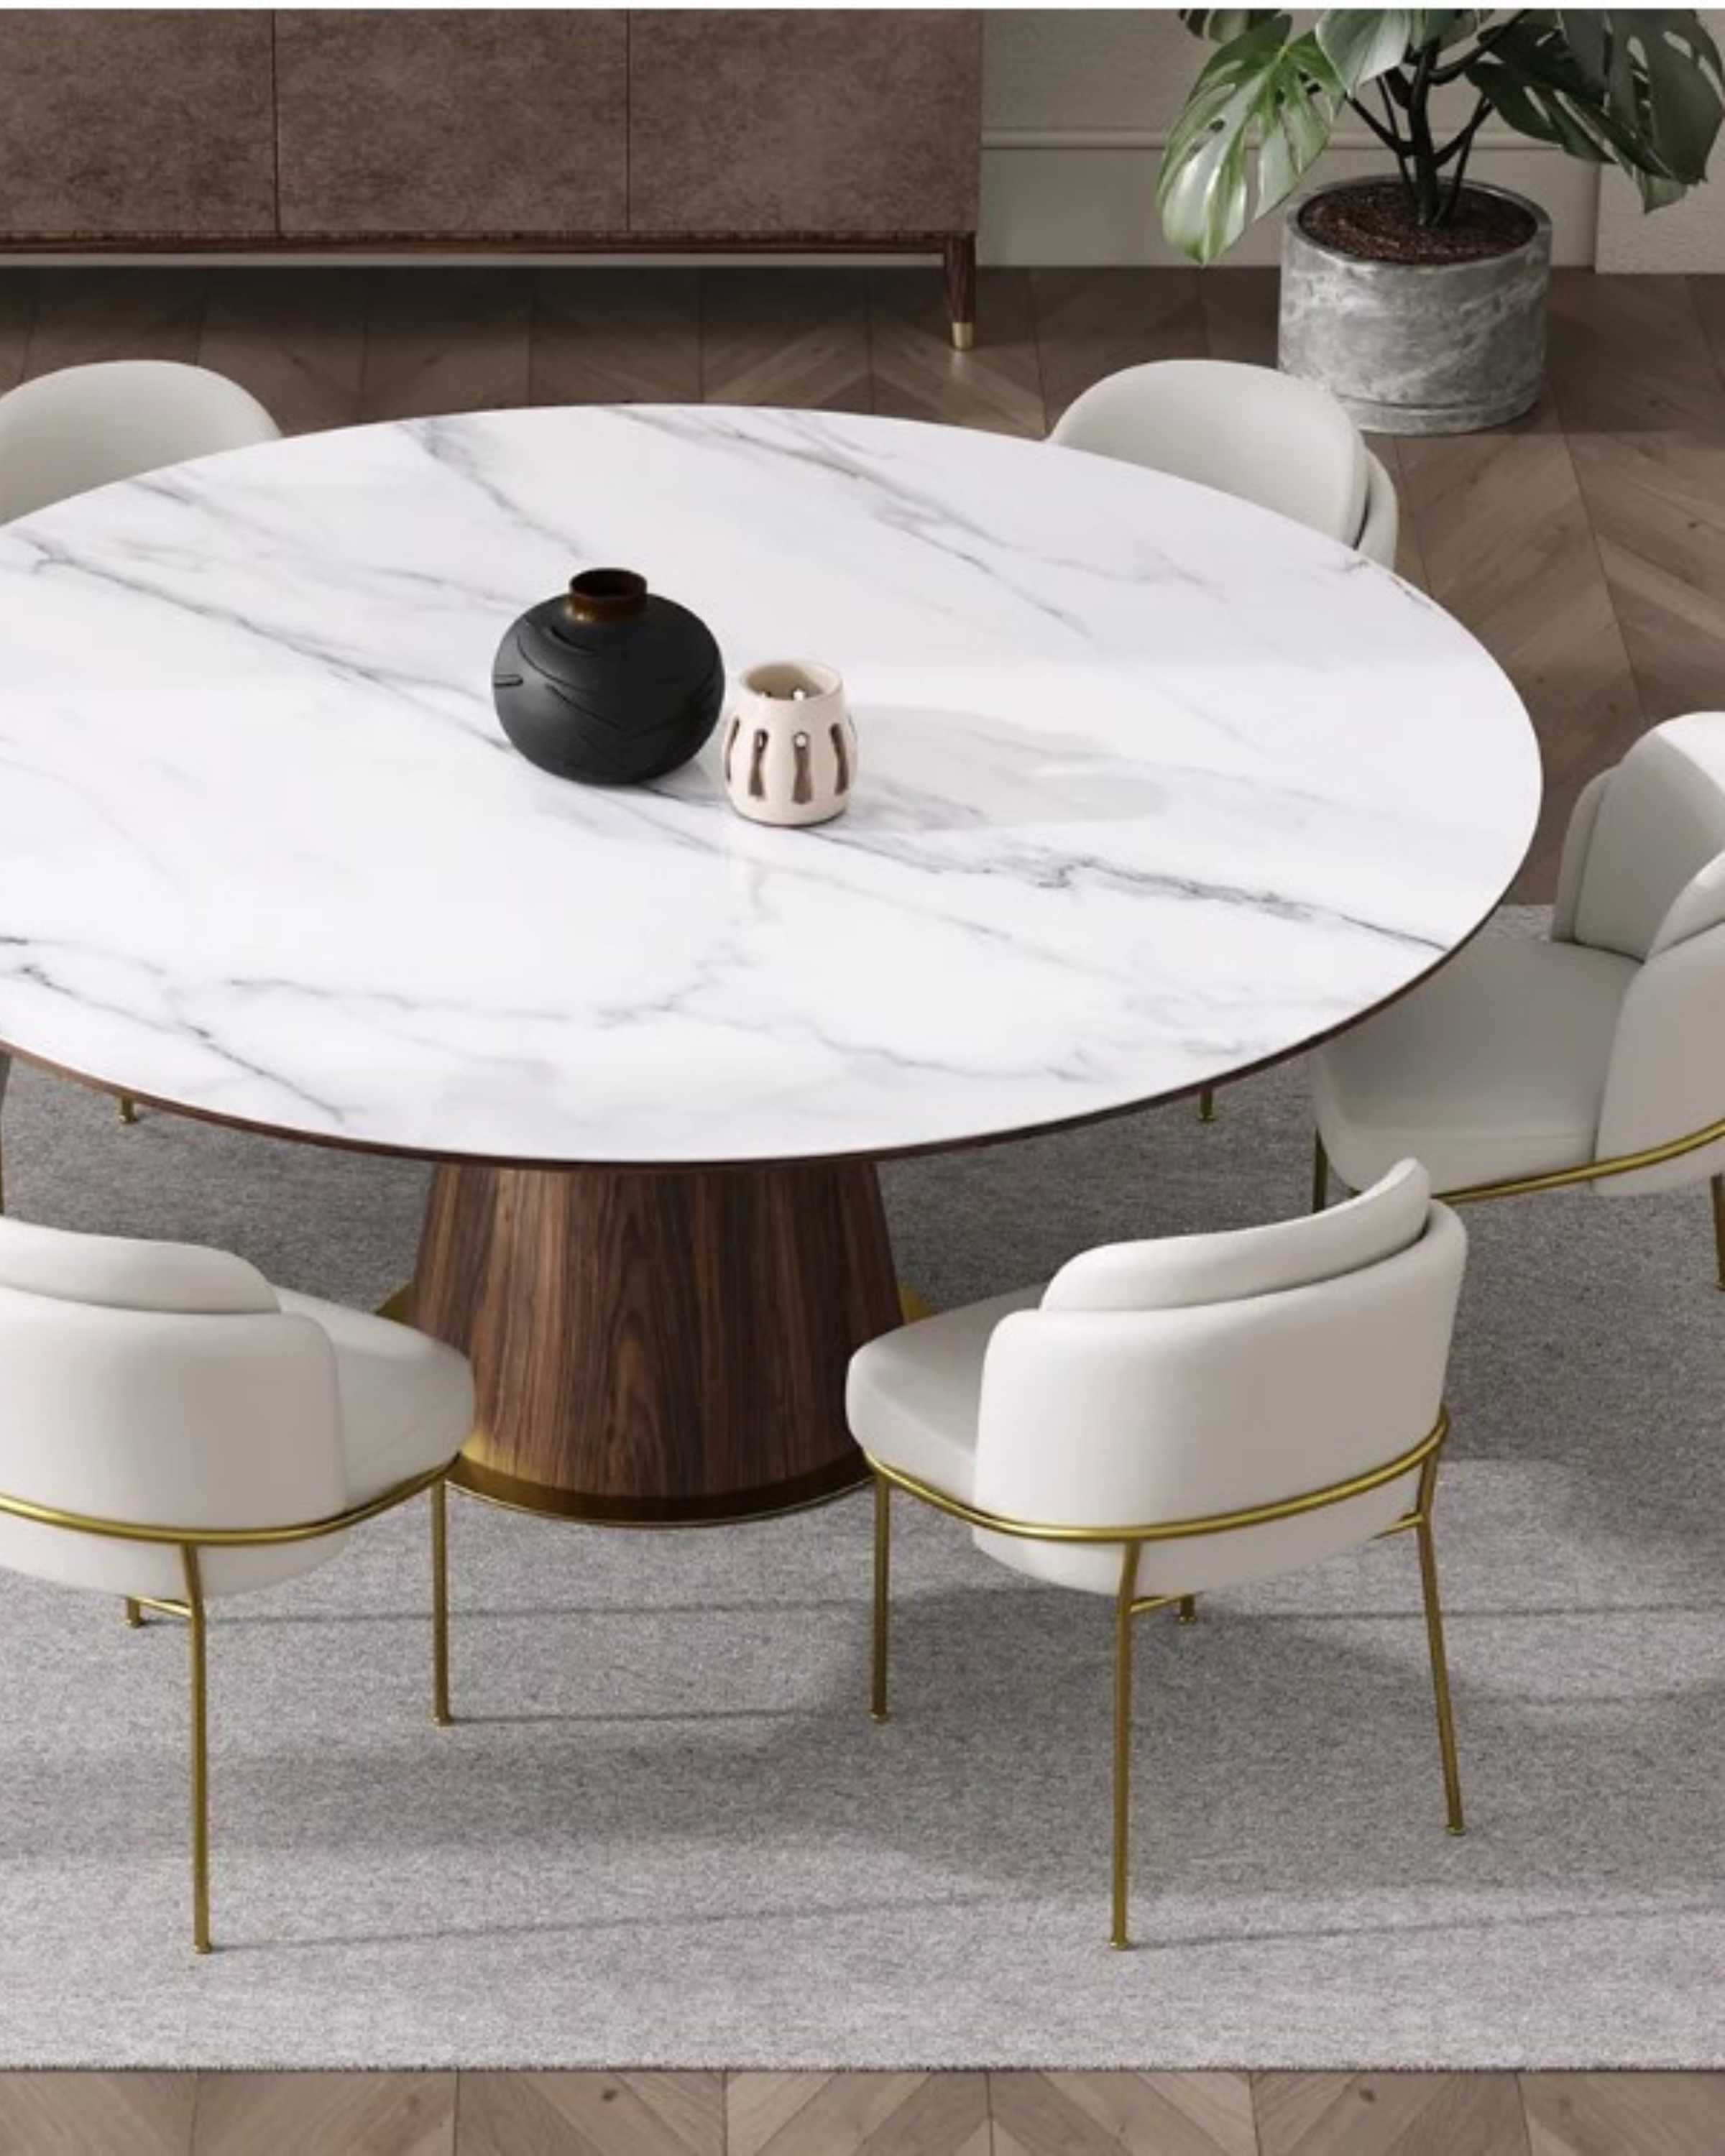 Ace Luxury Dining Chair with Six Seater Round Table ANGIE HOMES